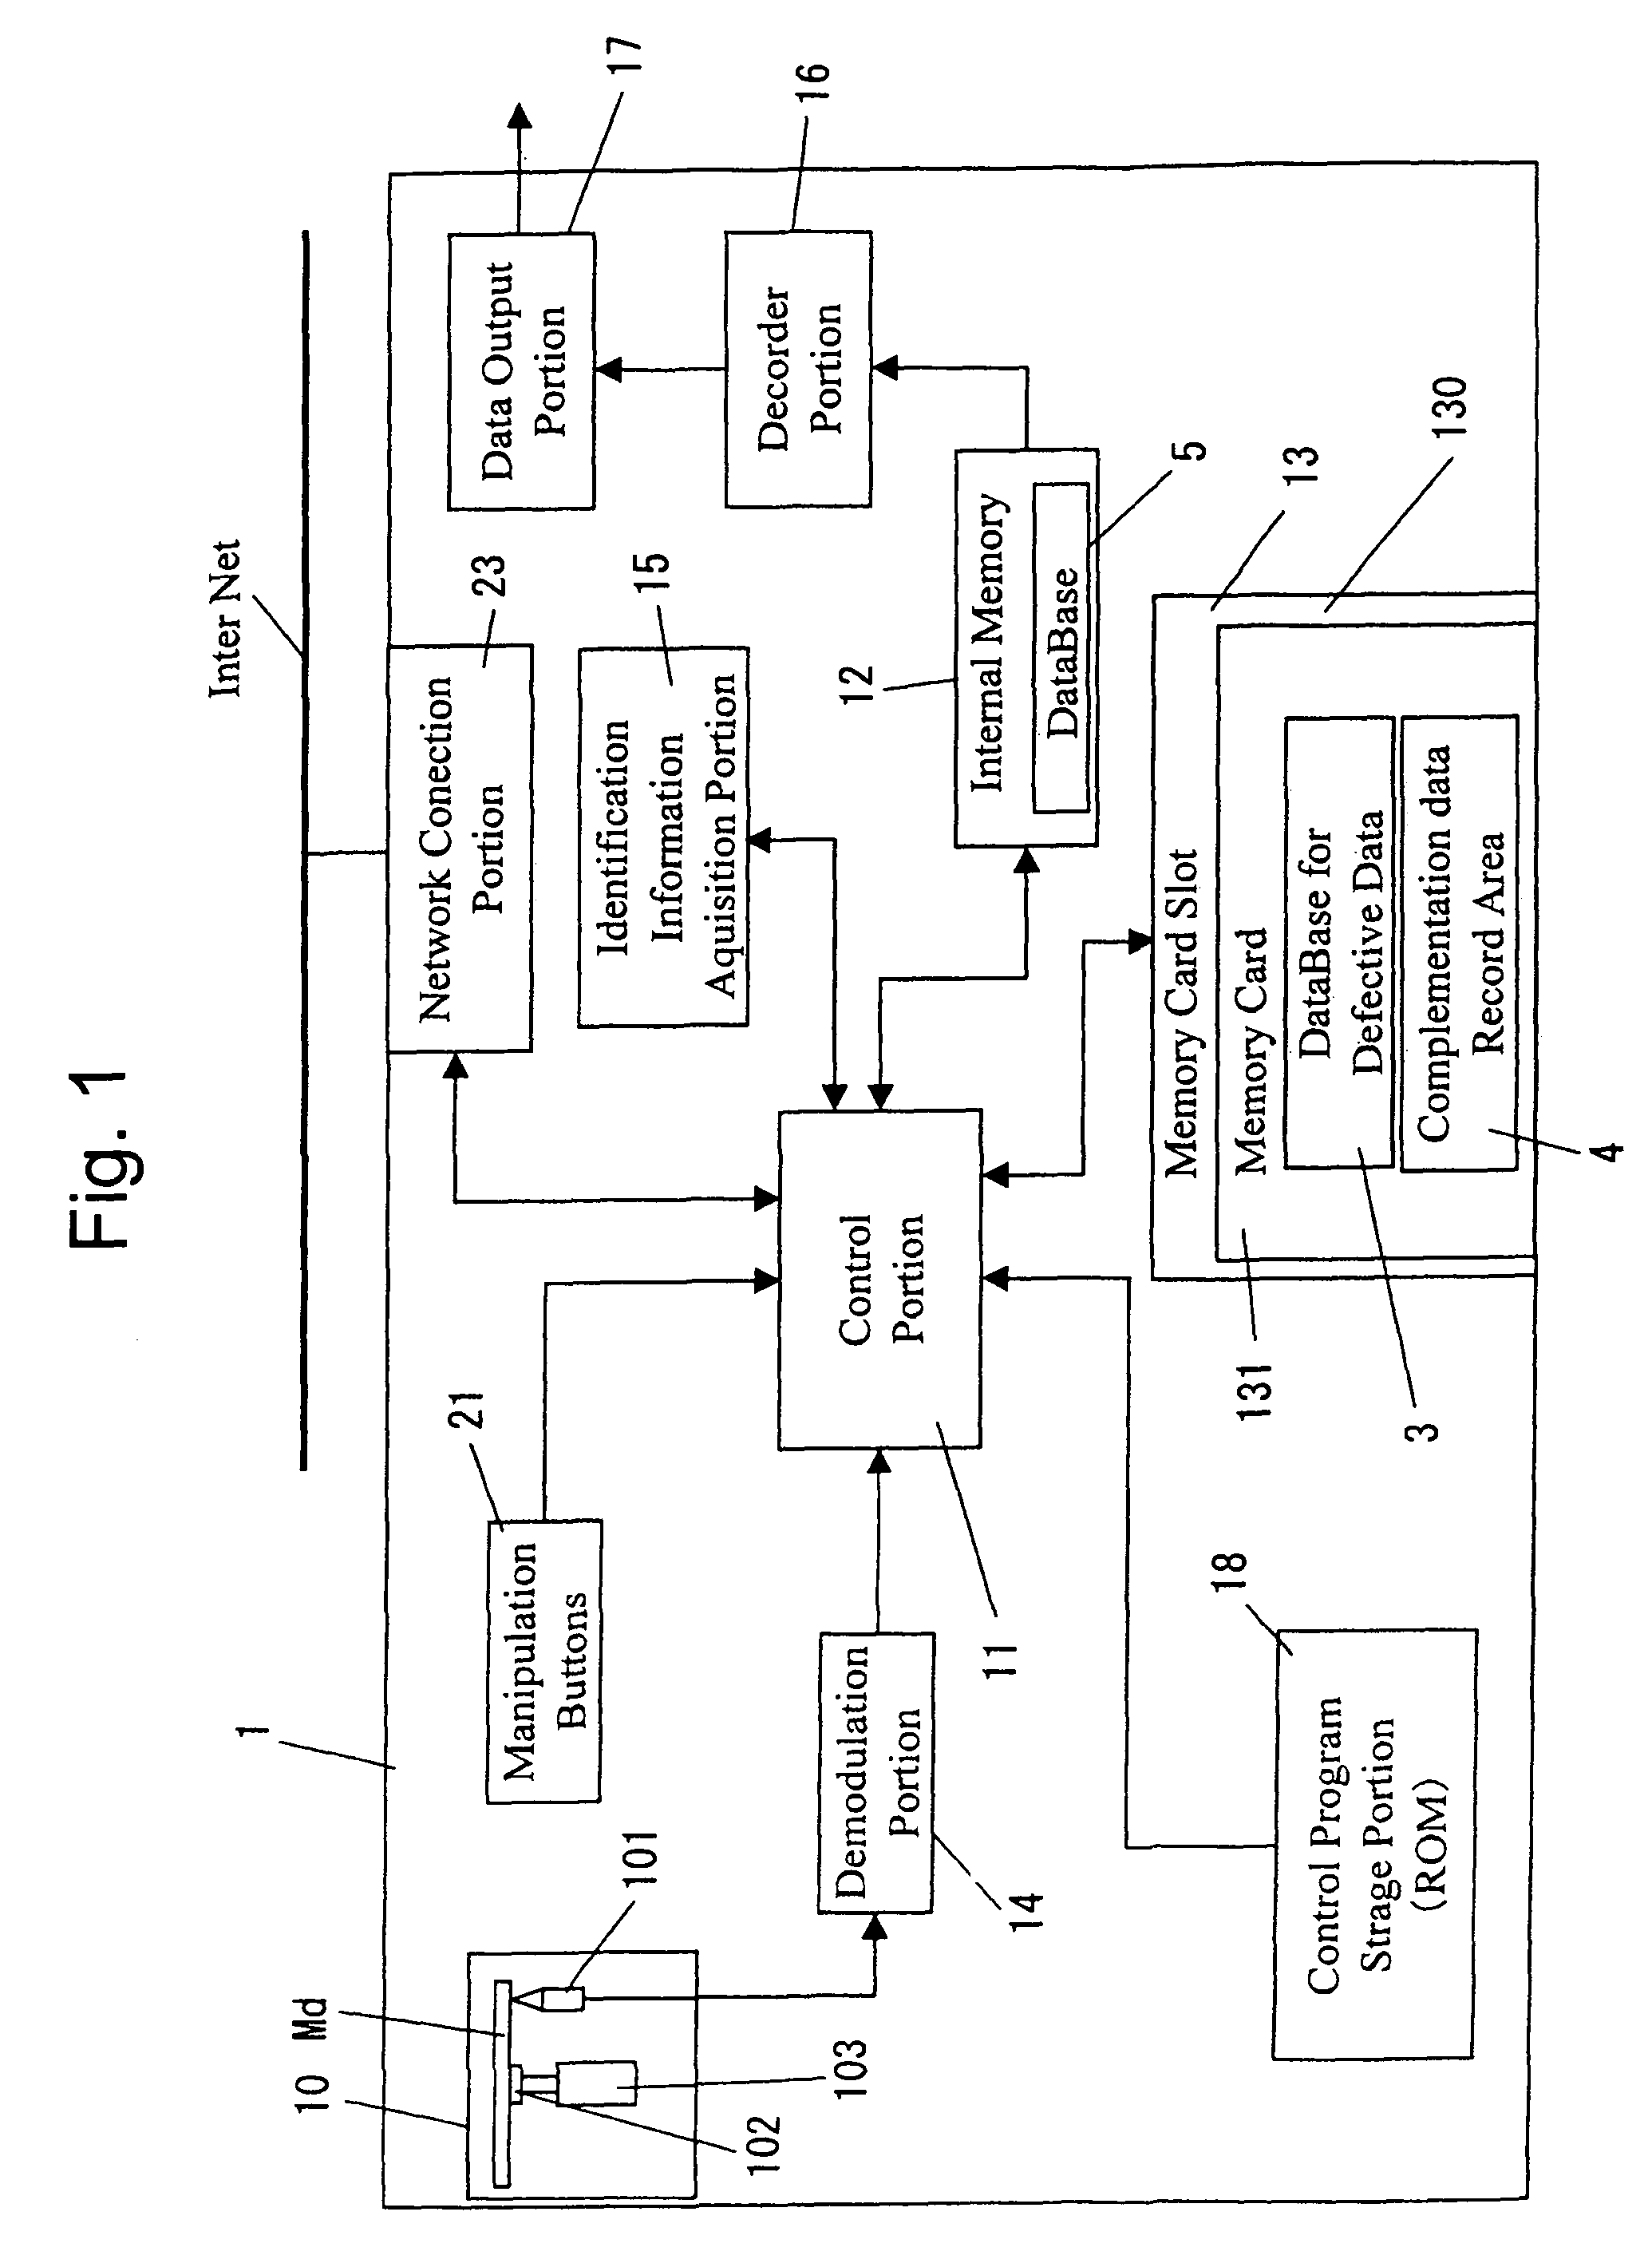 Optical disc apparatus and data complementation method